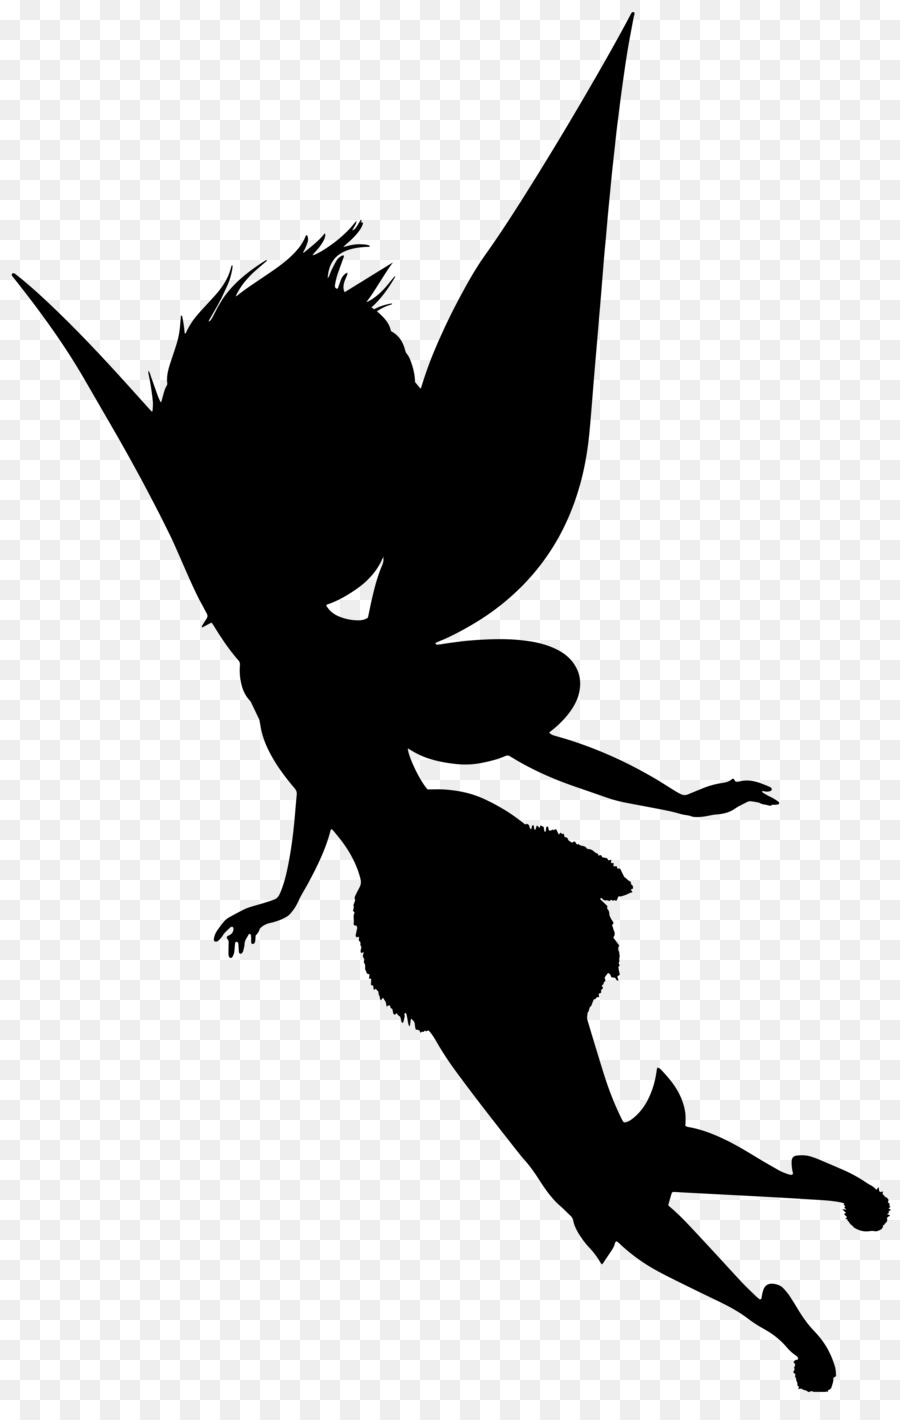 Fairy Silhouette Clip art - fairy dust png download - 5127*8000 - Free Transparent Fairy png Download.